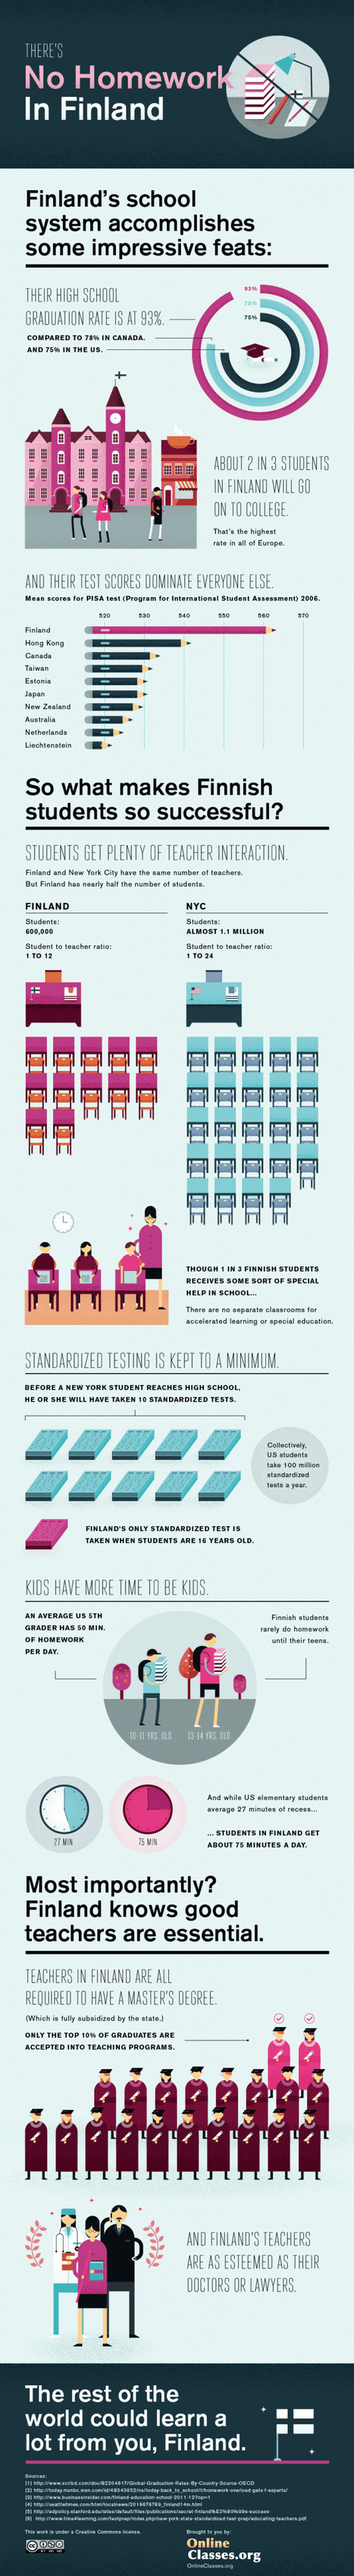 How Homework Works In Finland (Hint: There Isn't Any) | Infographic | 21st Century Learning and Teaching | Scoop.it